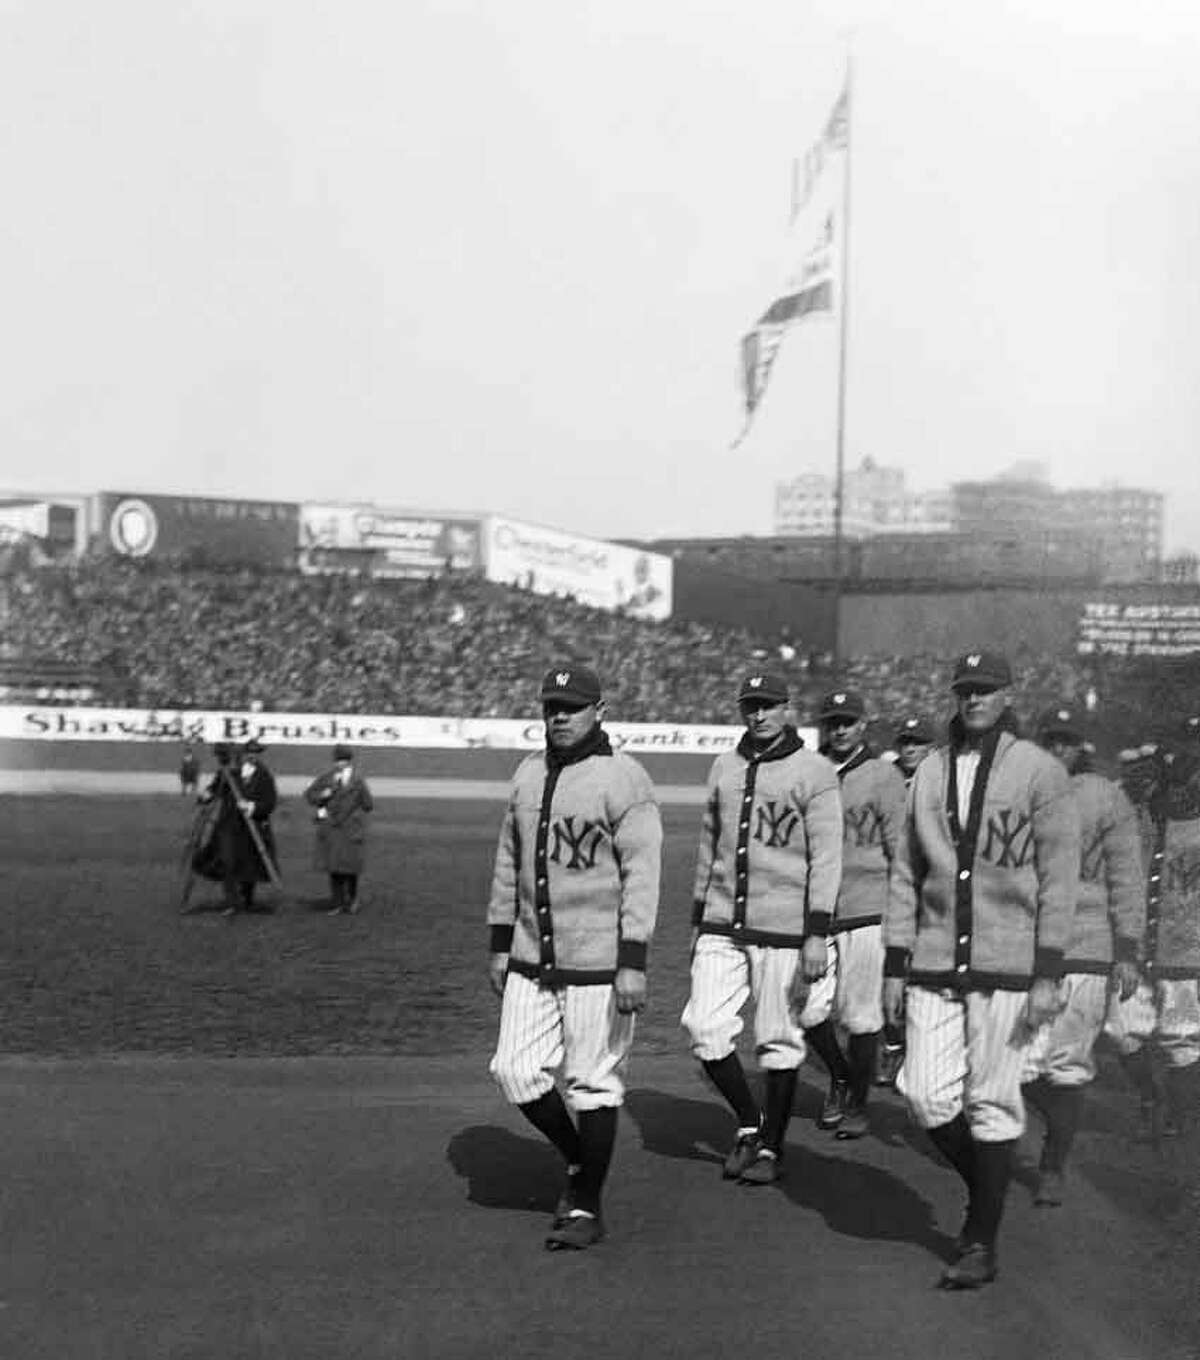 Photos: On this day in 1923, Yankee Stadium opens